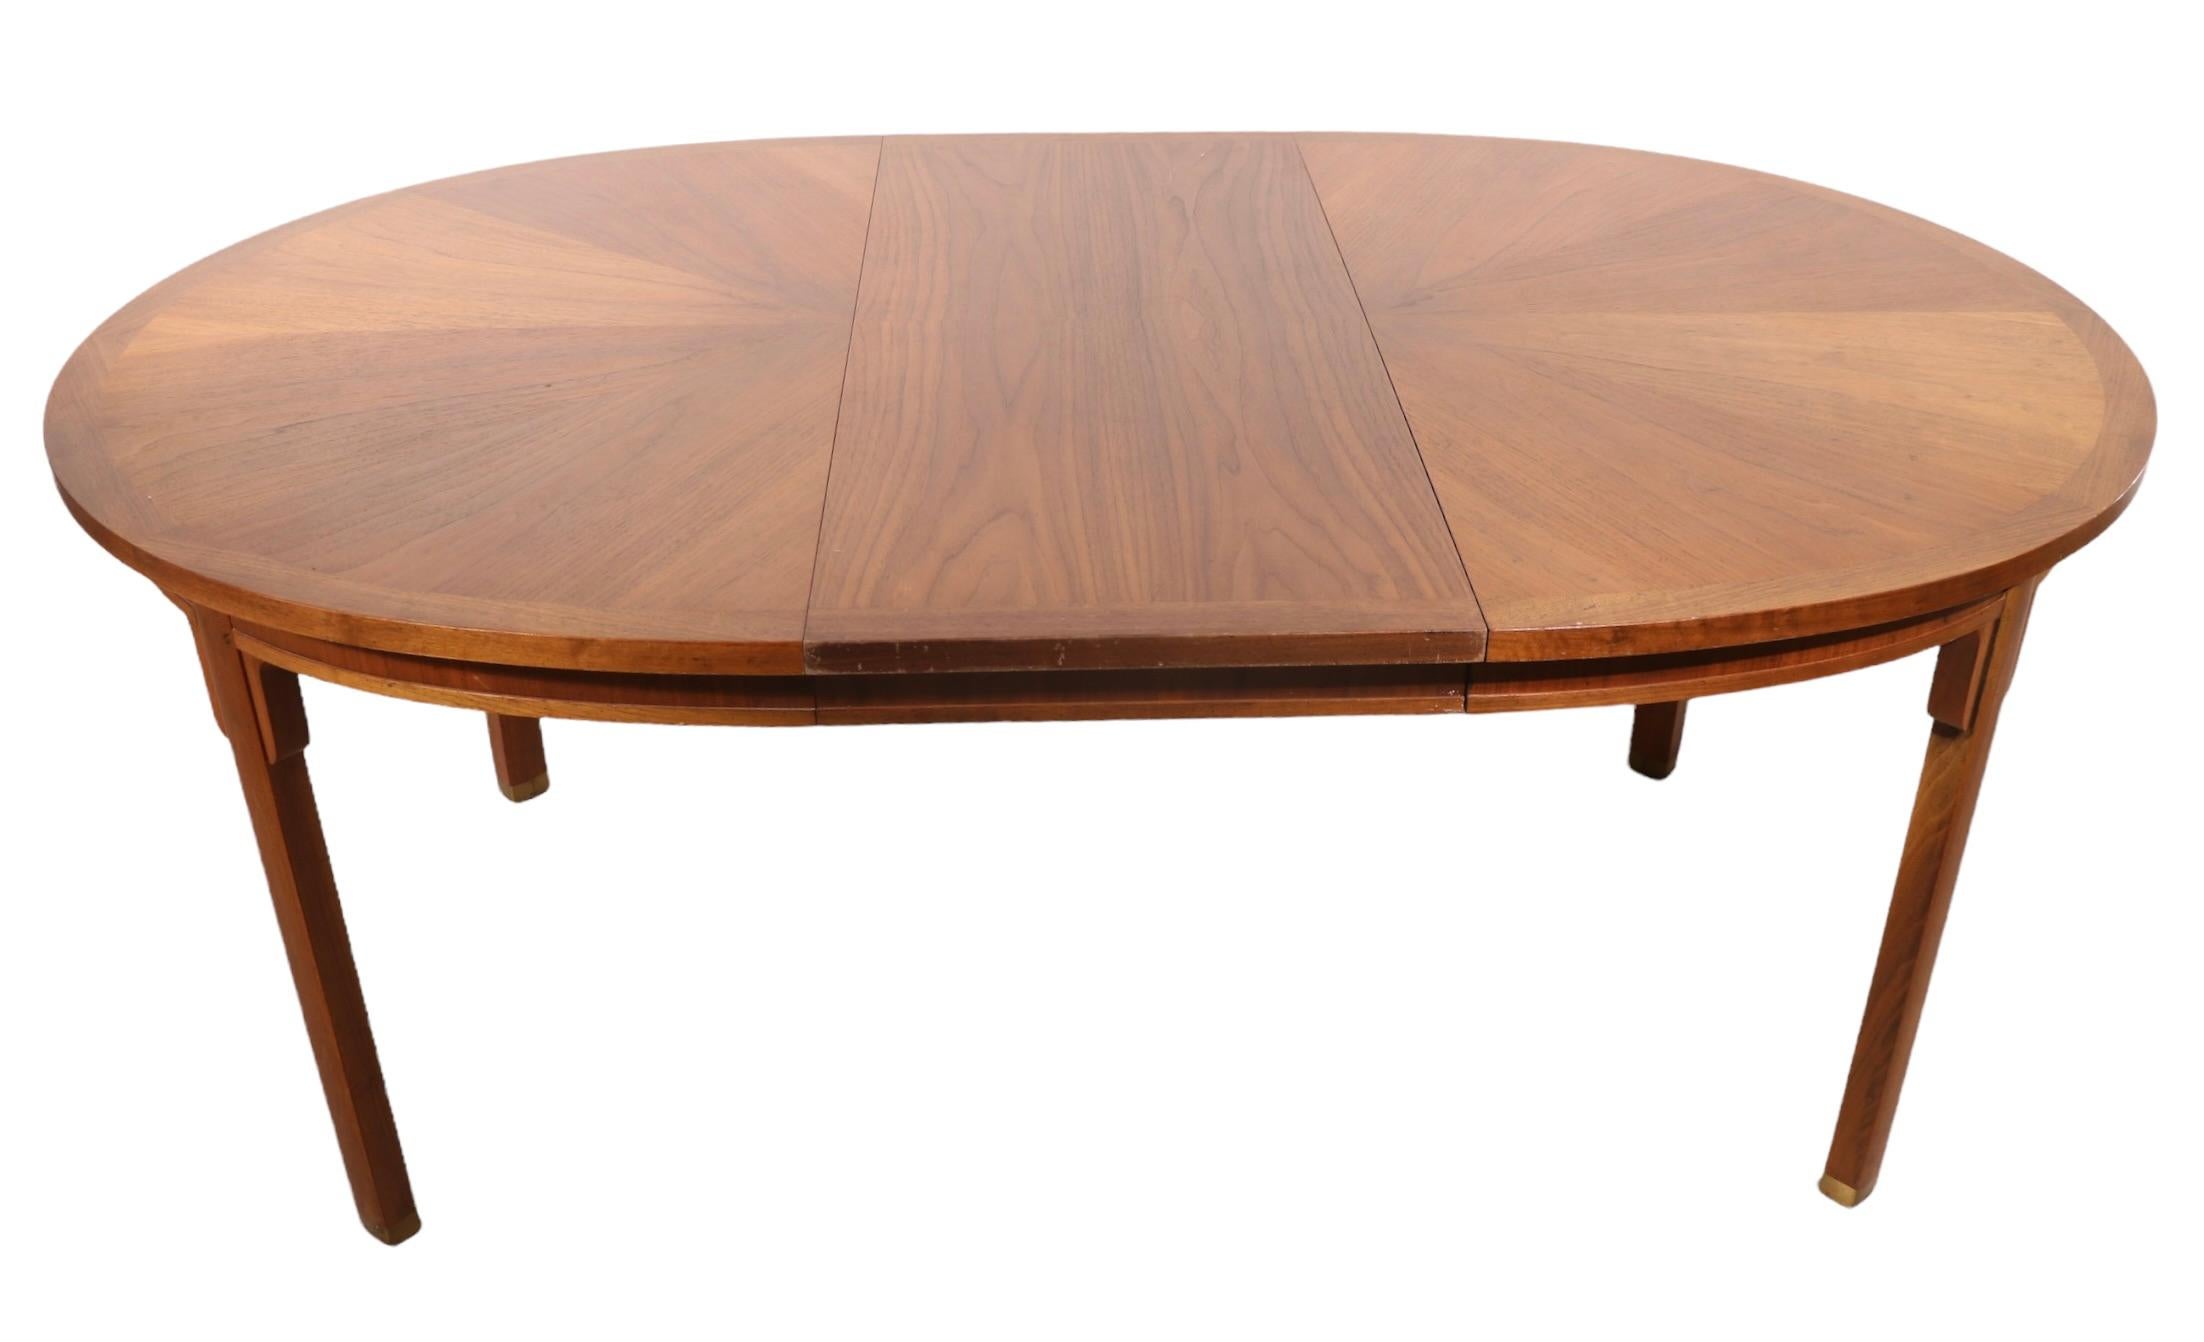 Chic Chinese style dining table by high end American furniture maker , Baker, from their Milling Road division. The table comes with three large ( 18 in. W each ), allowing it to be extended from the closed position ( 54.2 in. W ) to the open 
 (